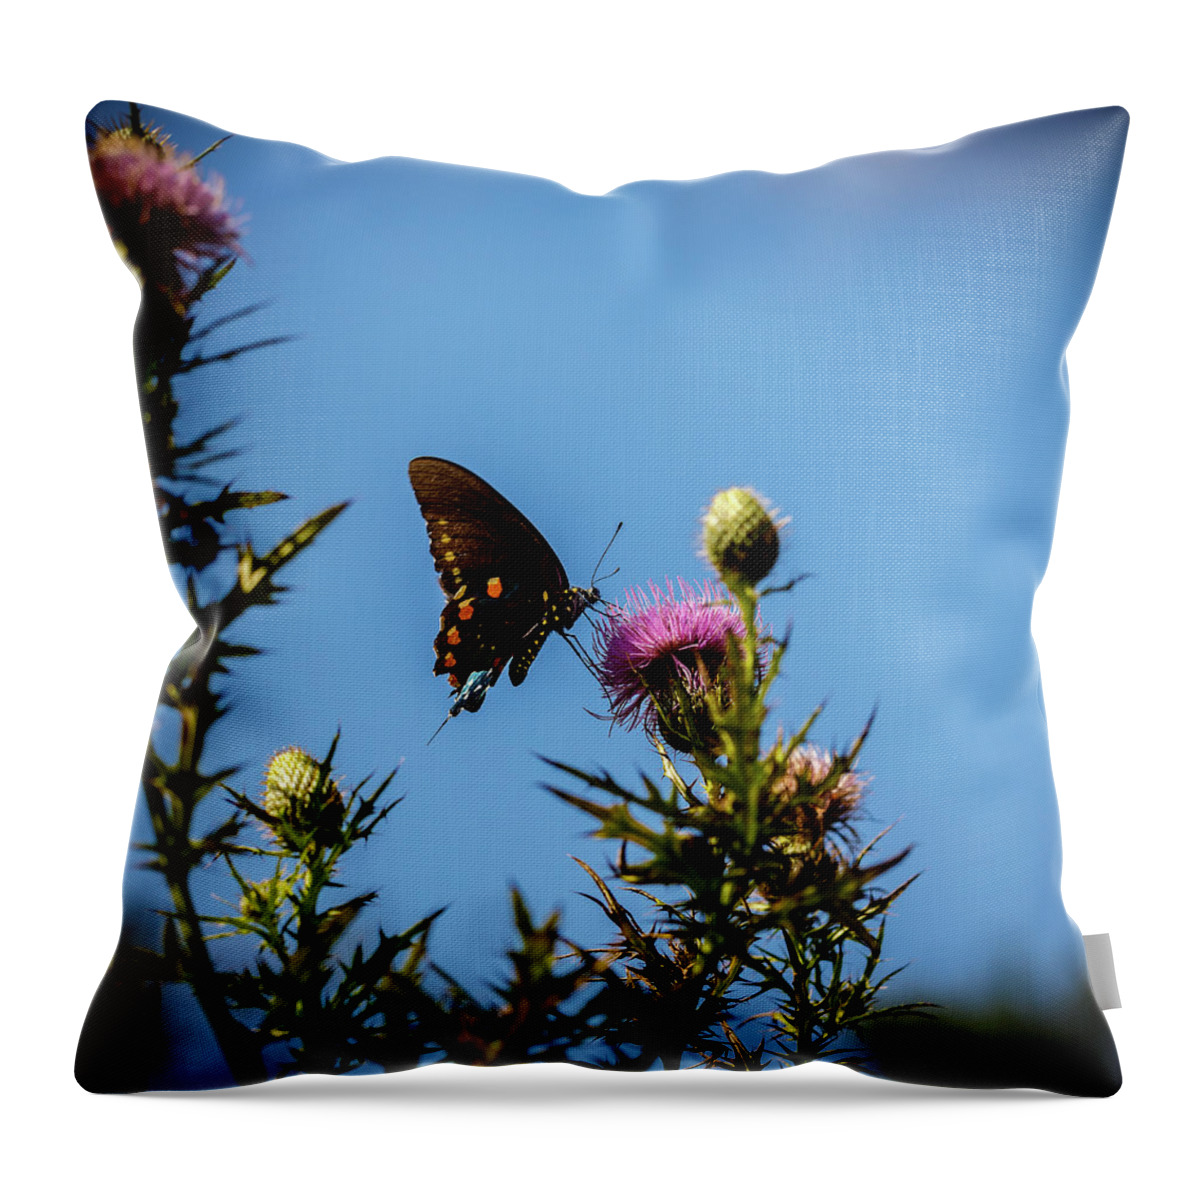 Butterfly Throw Pillow featuring the photograph Butterfly by David Beechum